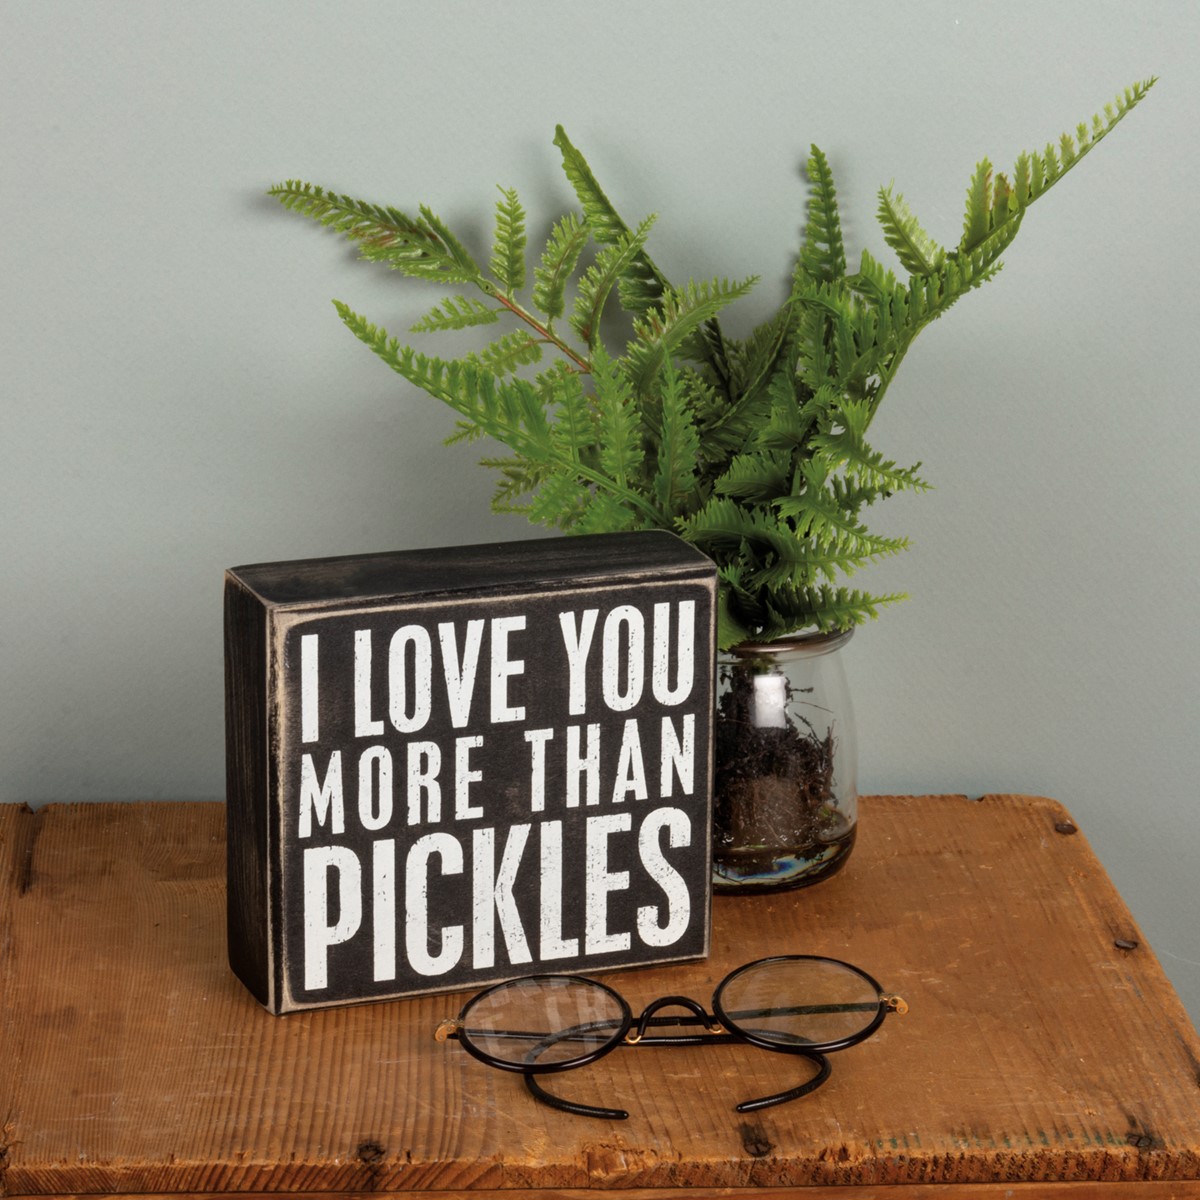 Box Sign - I Love You More Than Pickles - 5" x 4.50" x 1.75" - Wood